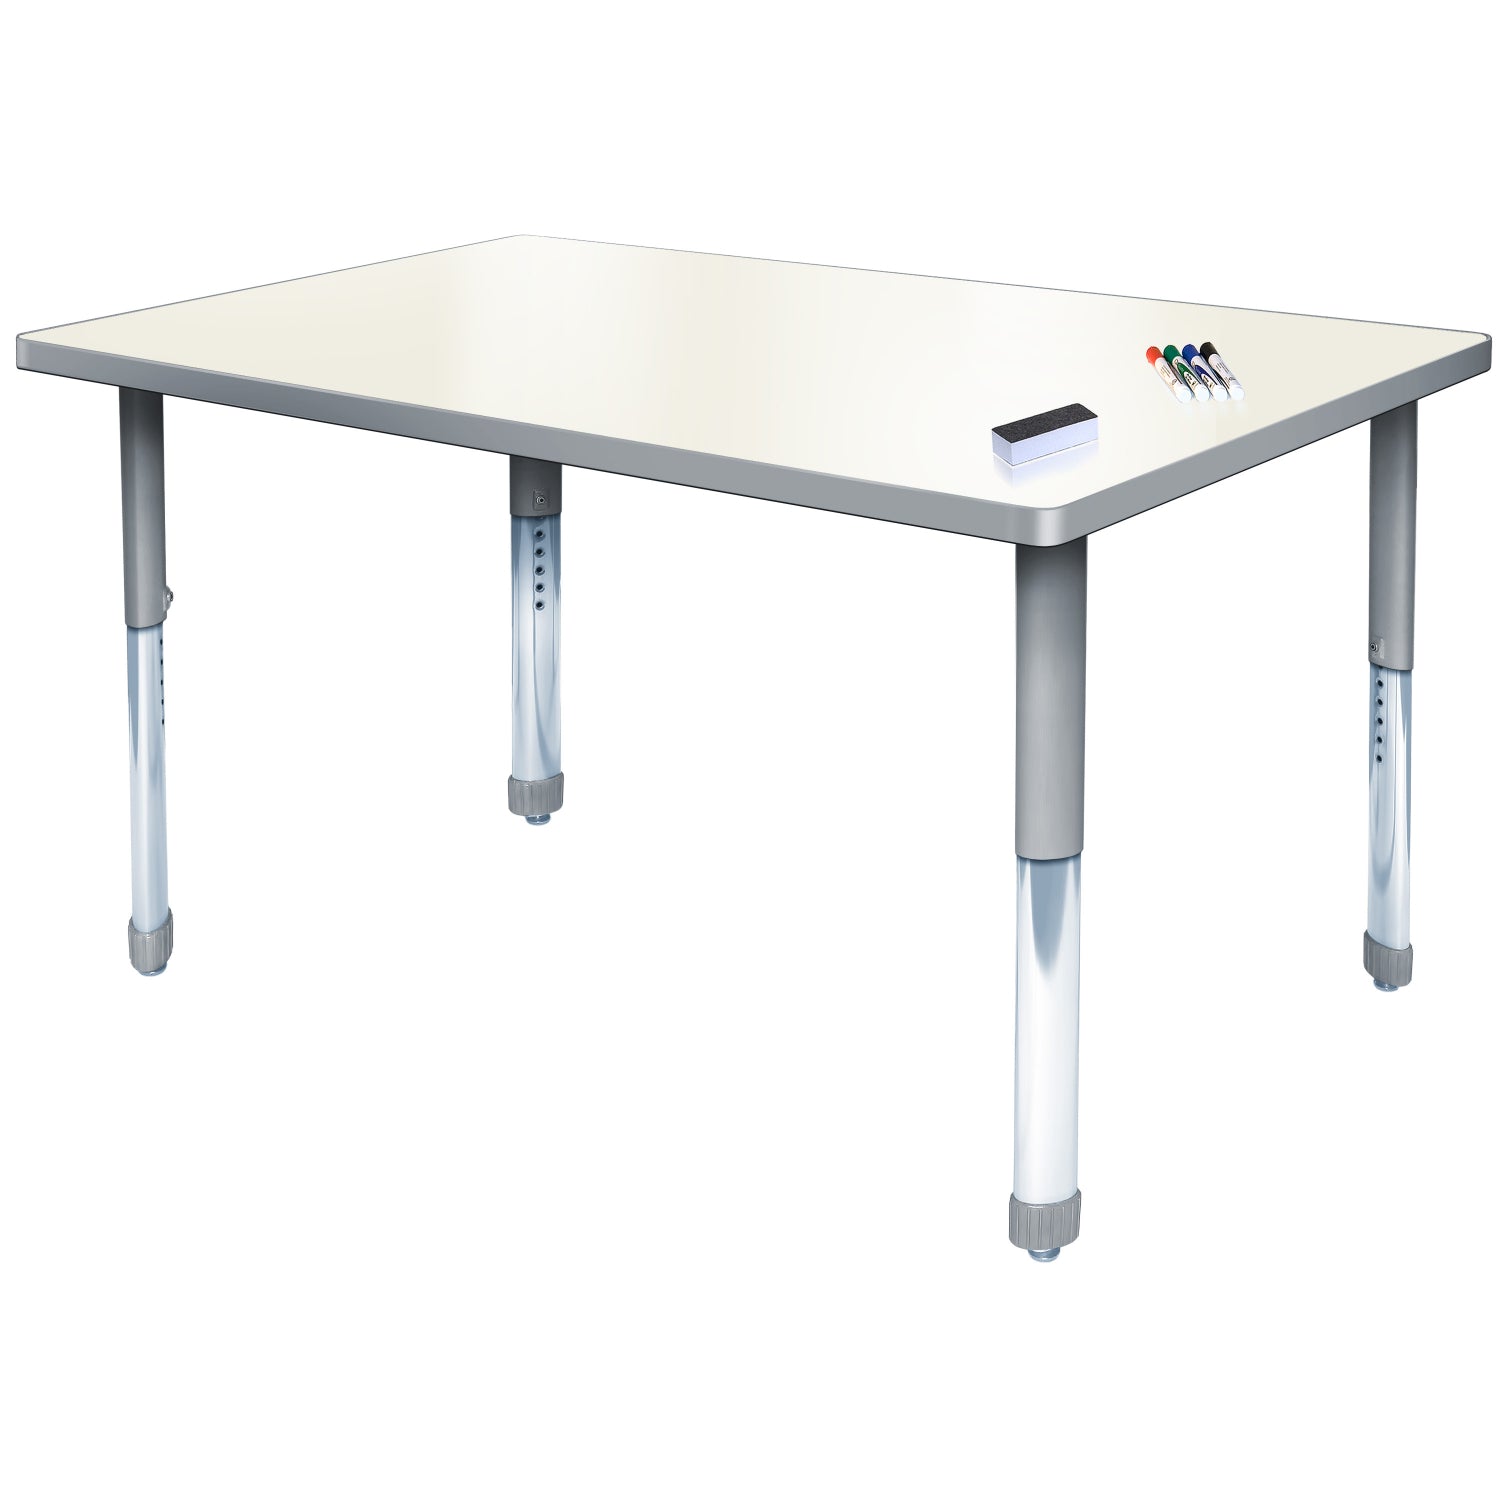 Aero Dry Erase Markerboard Activity Table, 36" x 60" Rectangle, Oval Adjustable Height Legs